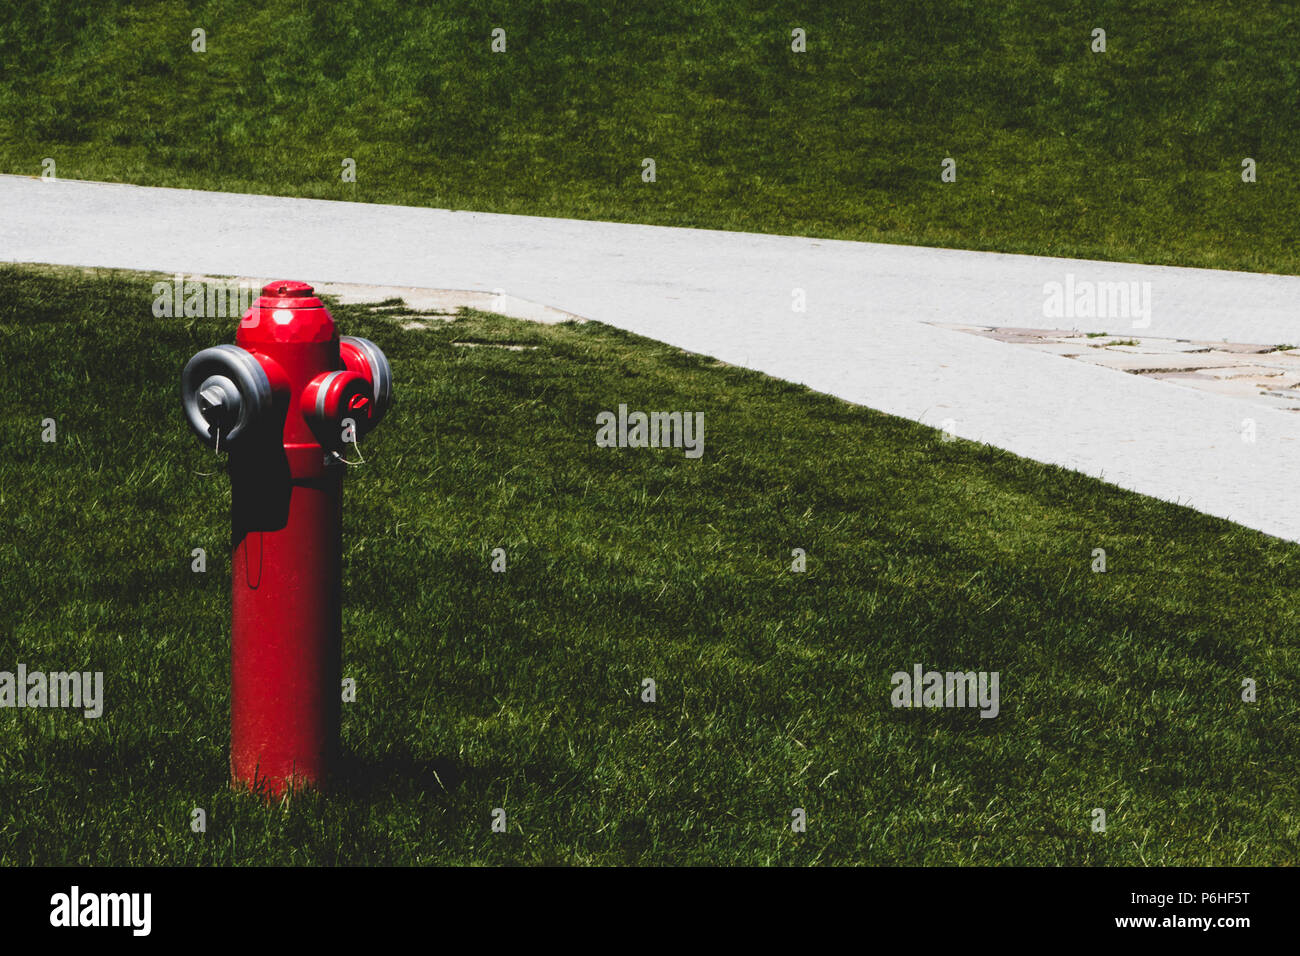 Red fire hydrant (pump) on green grass, in front of white walkway. Stock Photo